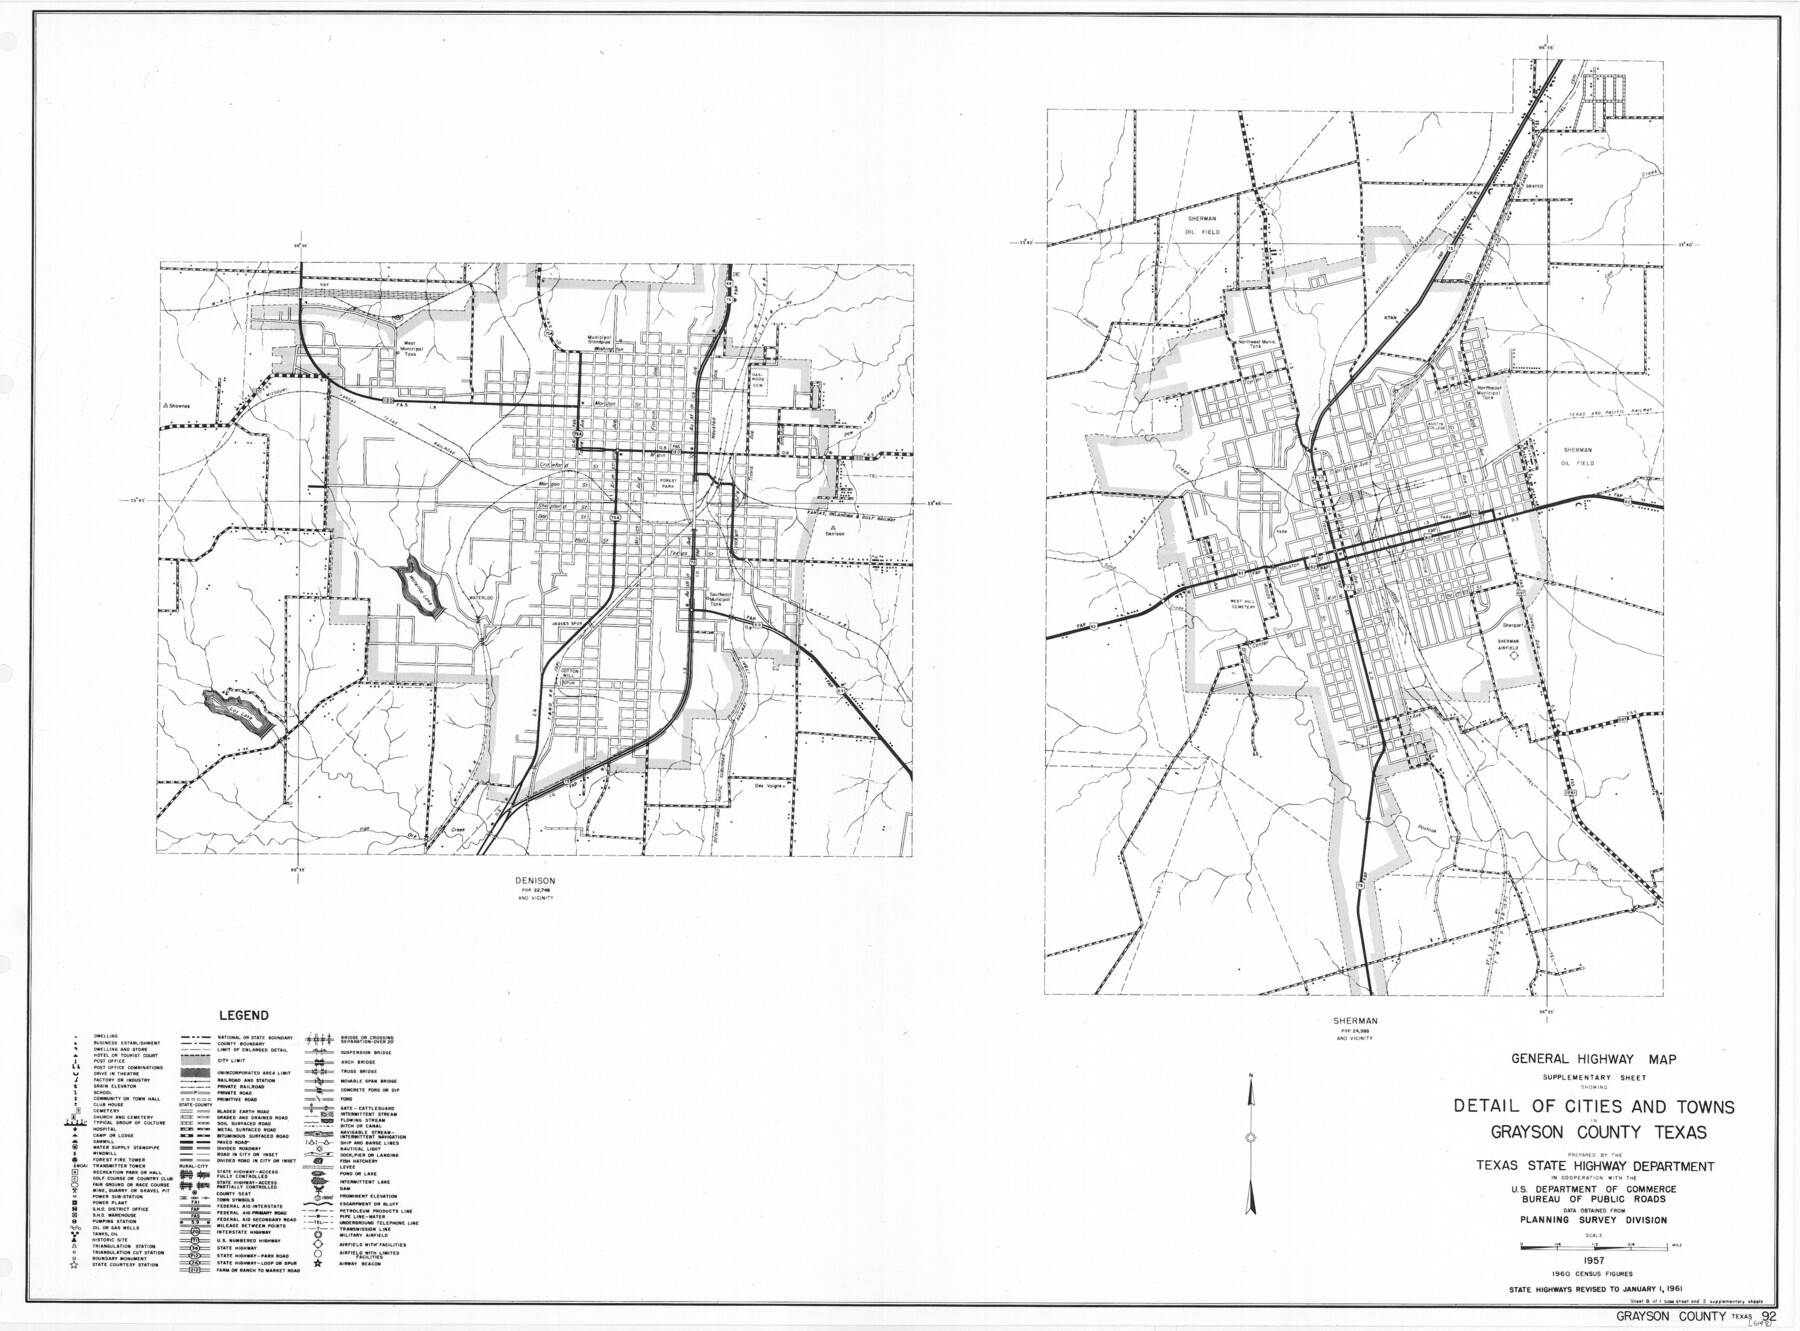 79487, General Highway Map.  Detail of Cities and Towns in Grayson County, Texas  [Denison and Sherman], Texas State Library and Archives